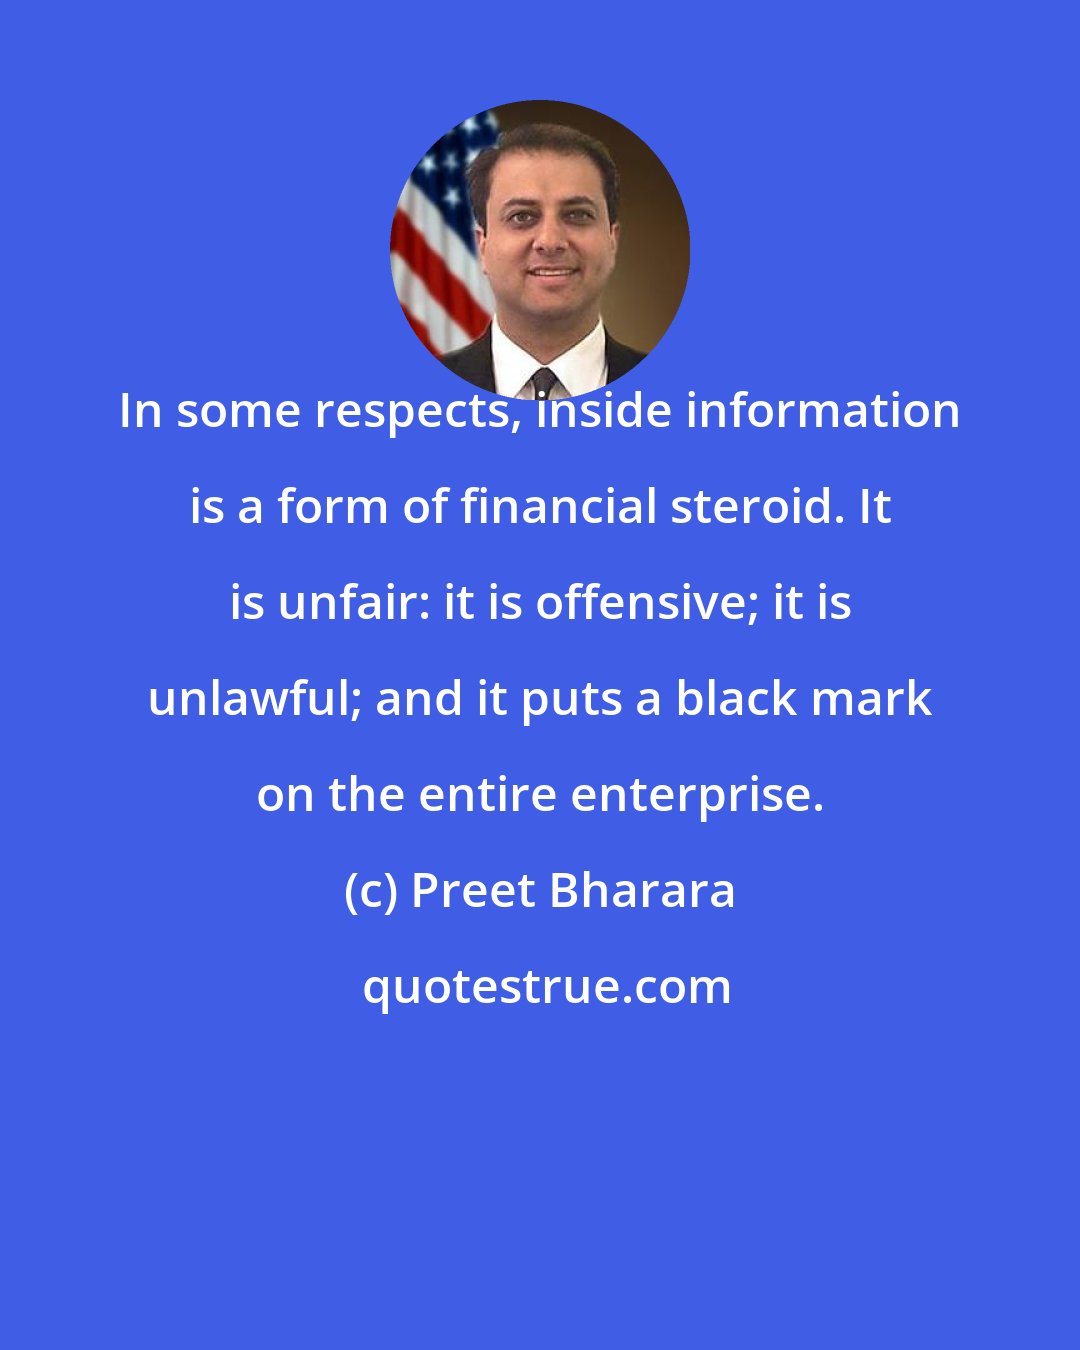 Preet Bharara: In some respects, inside information is a form of financial steroid. It is unfair: it is offensive; it is unlawful; and it puts a black mark on the entire enterprise.